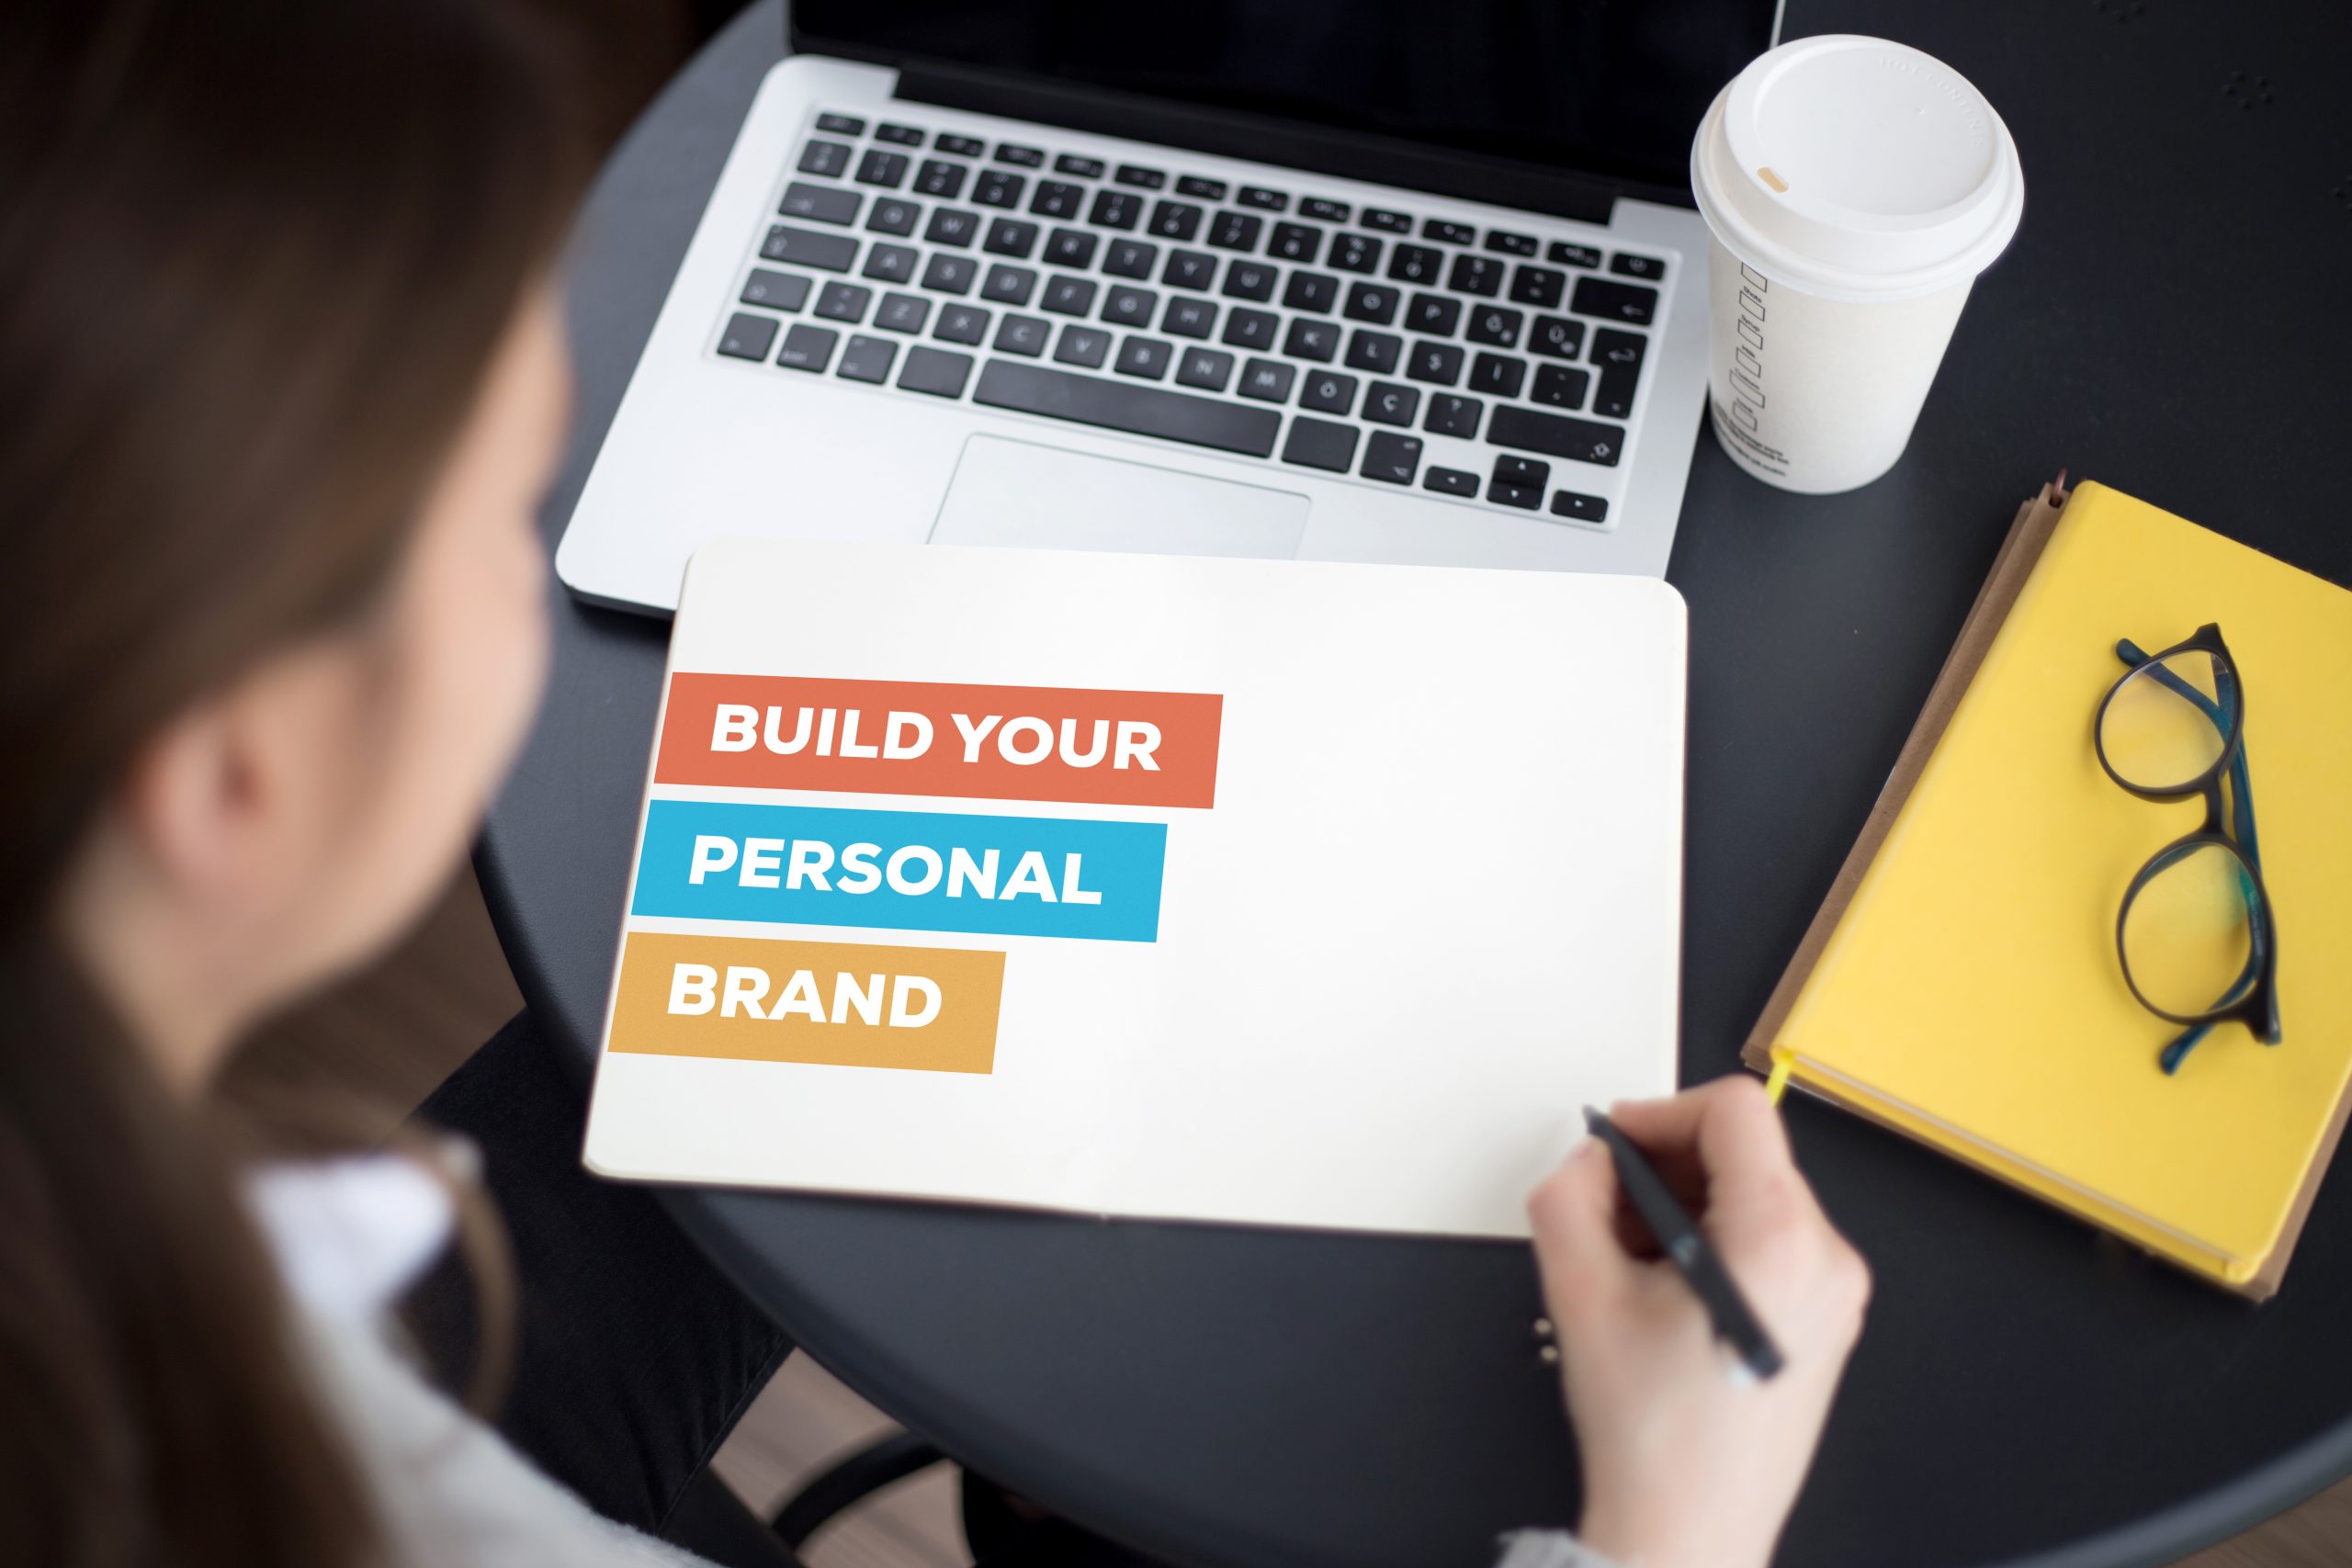 How To Build A Personal Brand – 4 Practical Tips